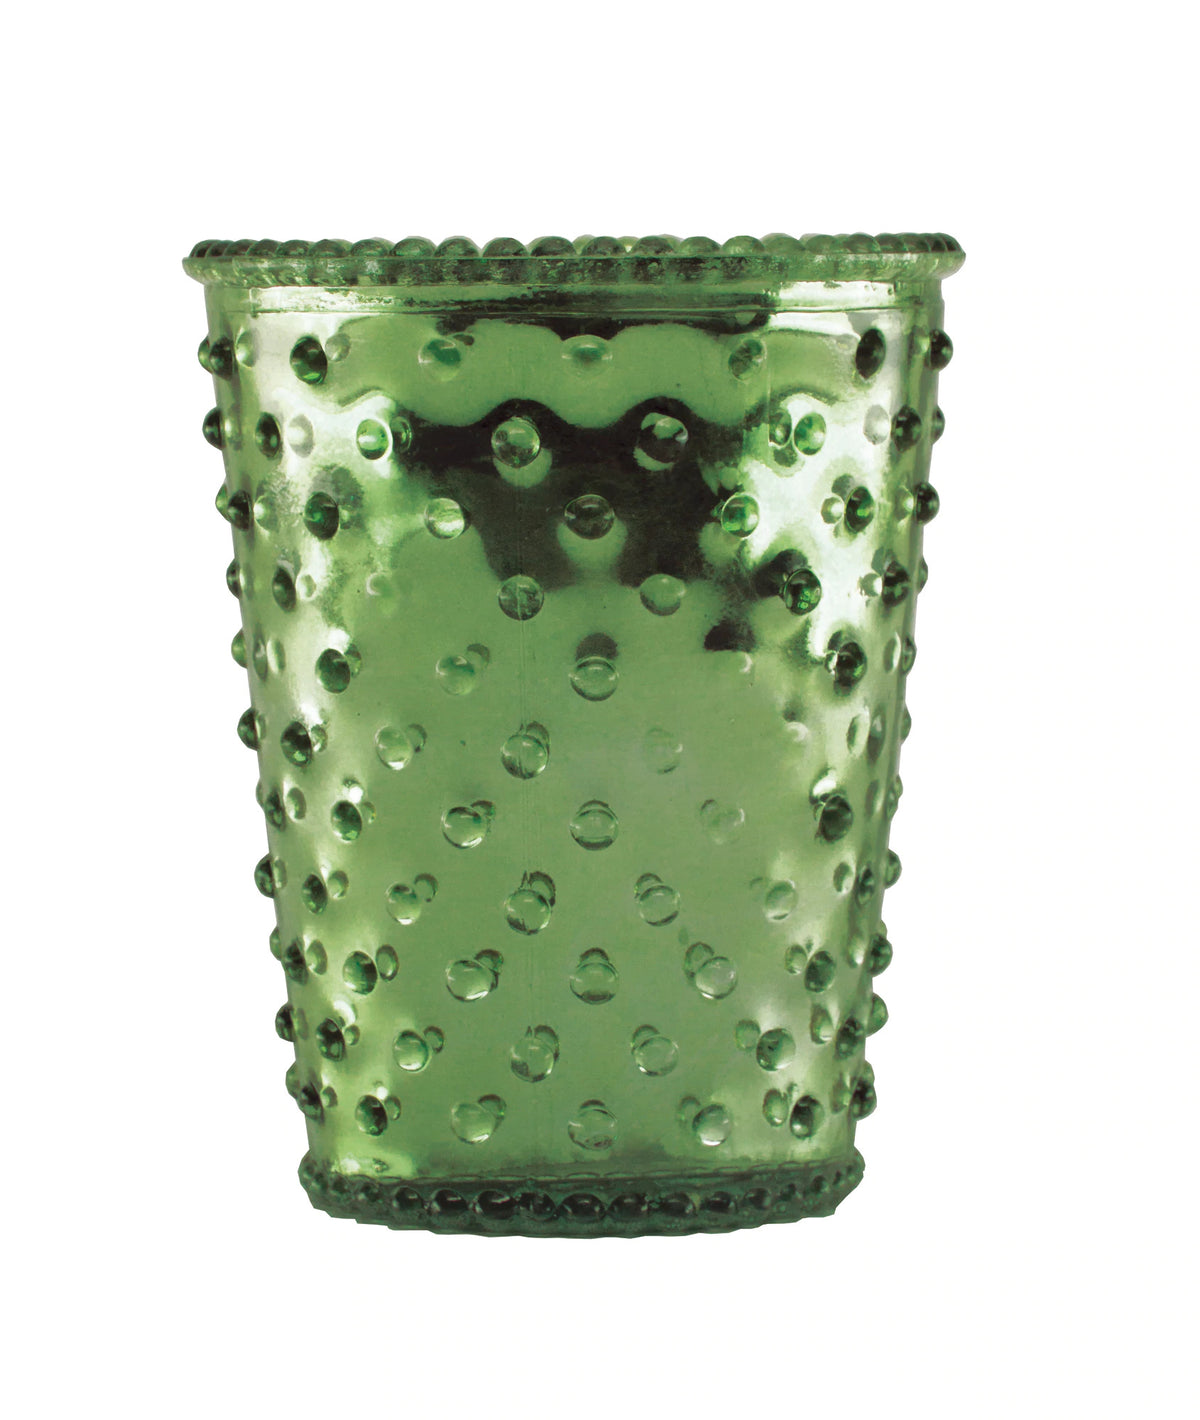 A green glass vase with a textured surface featuring raised dots and a scalloped edge, isolated on a white background, reminiscent of an evergreen forest fragrance, similar to the Simpatico NO. 78 Evergreen Hobnail Glass Candle.